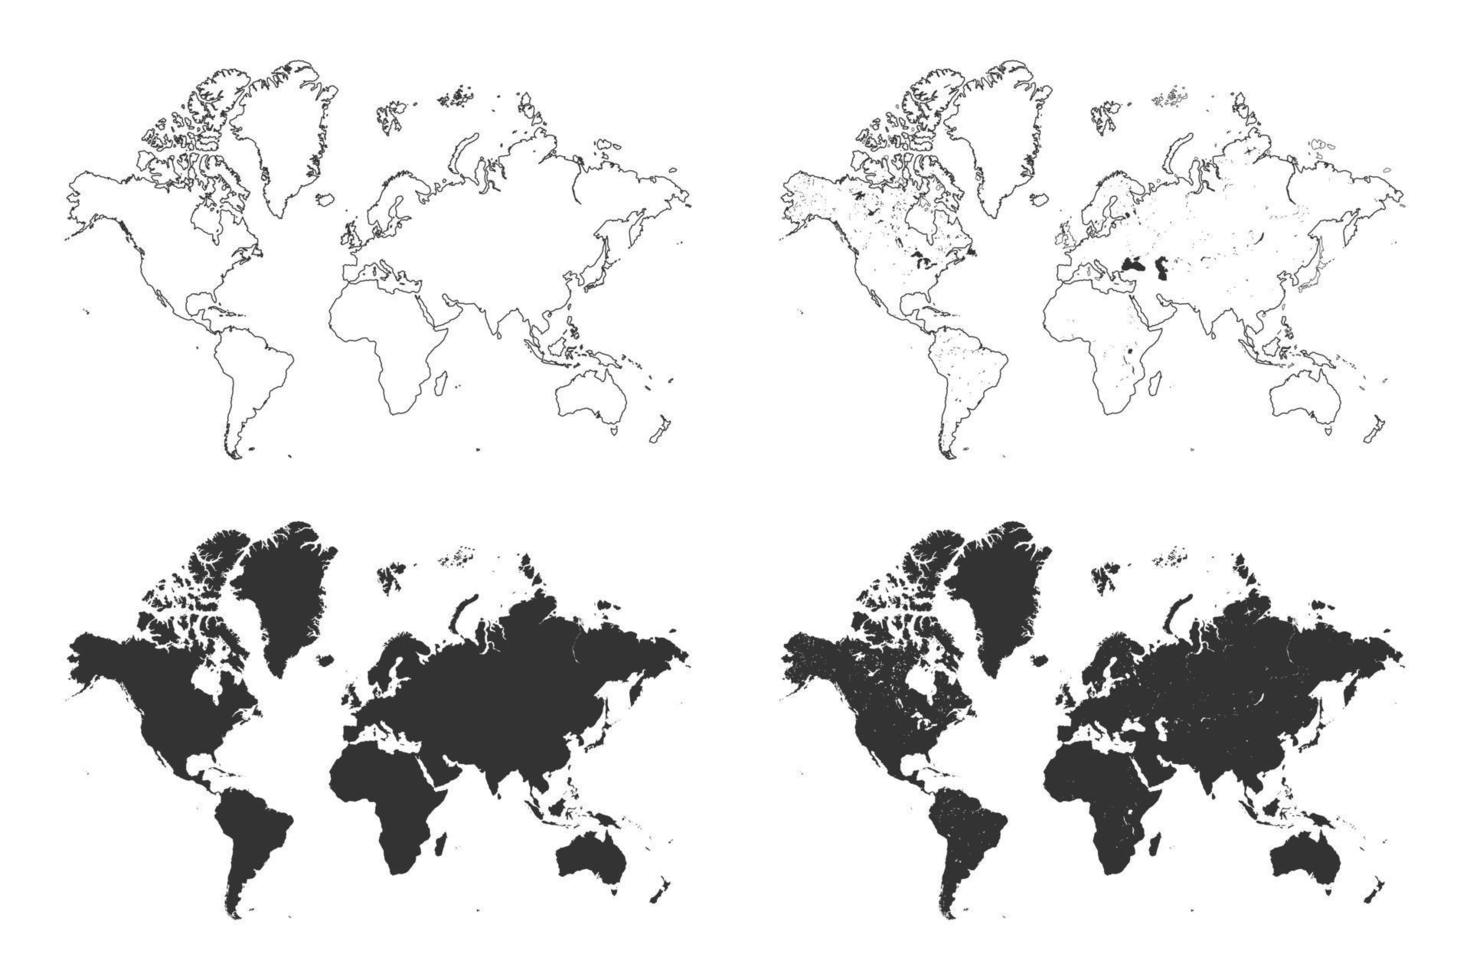 World map silhouette on white background with different style. vector